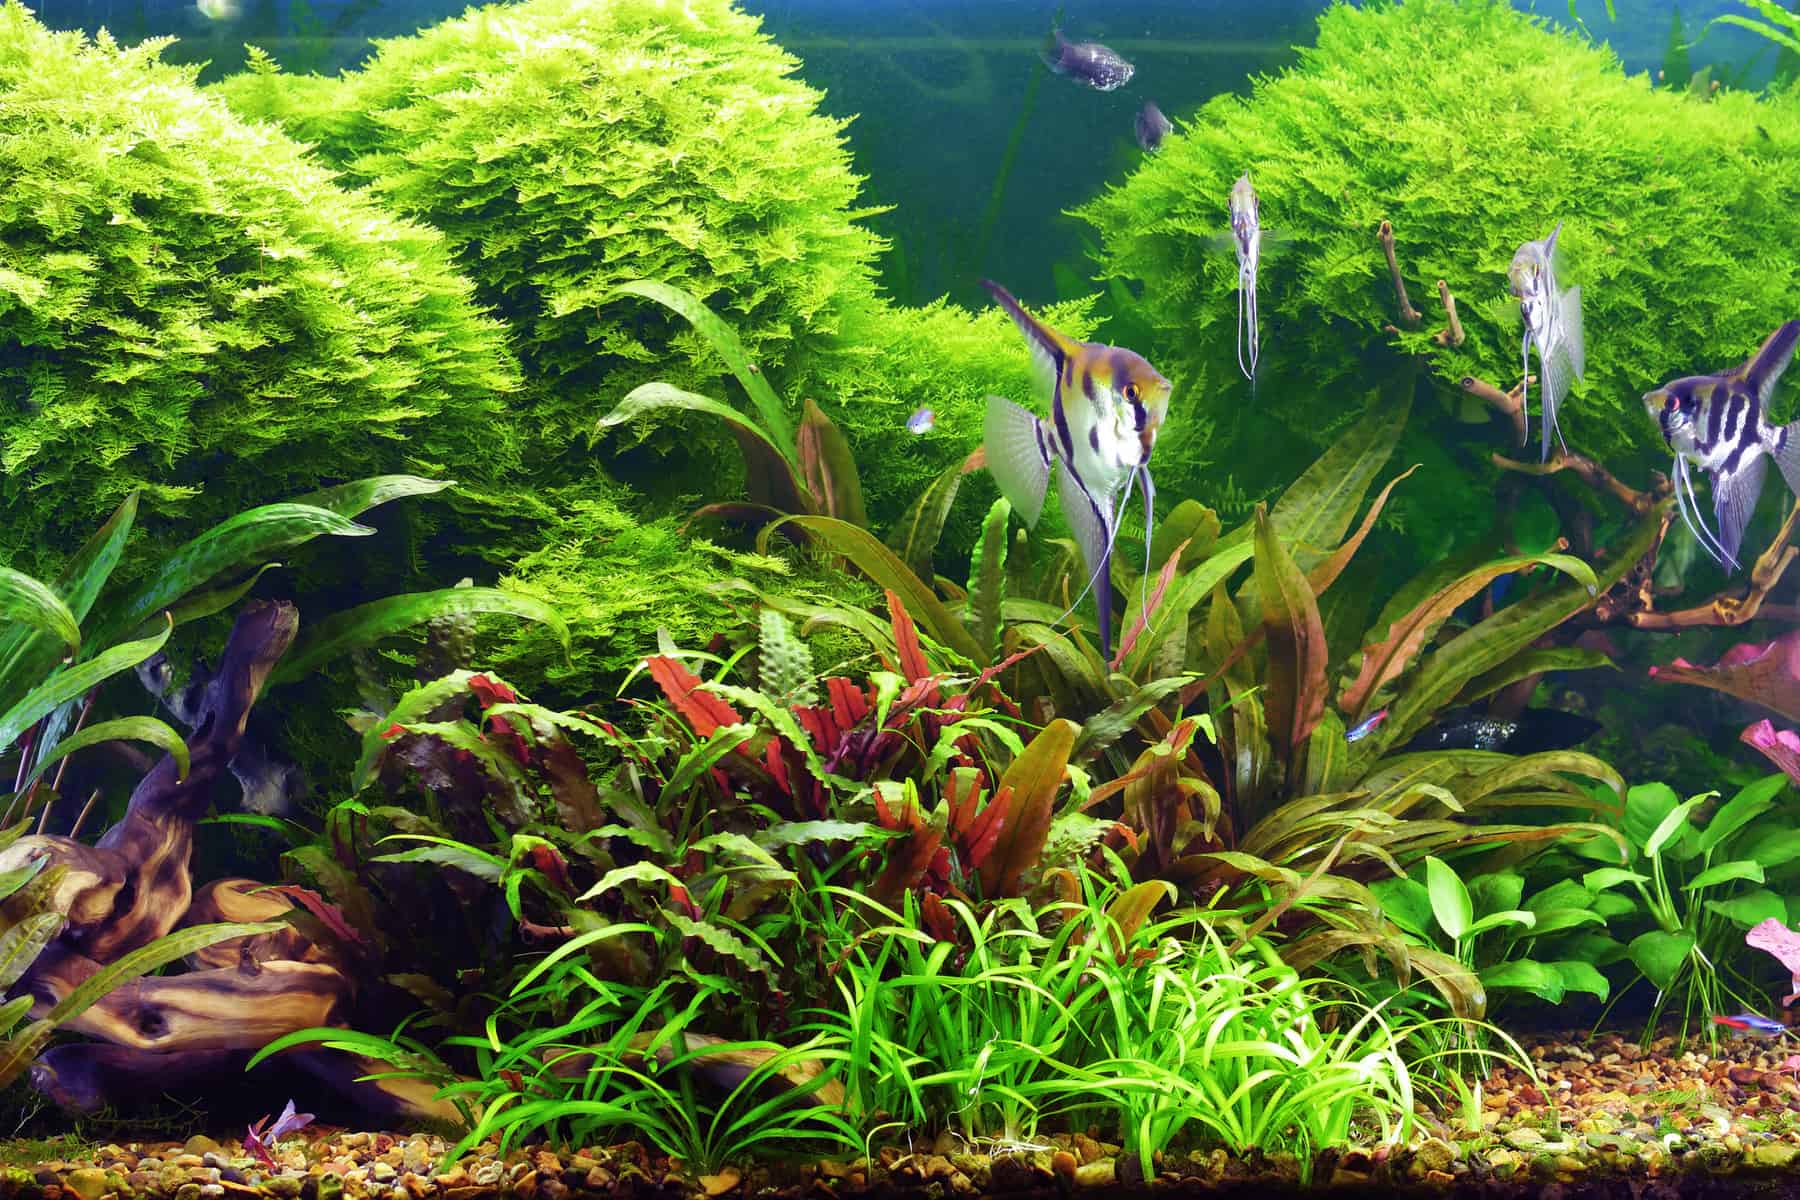 Jungle Val: Freshwater Aquatic Plant For All Fish